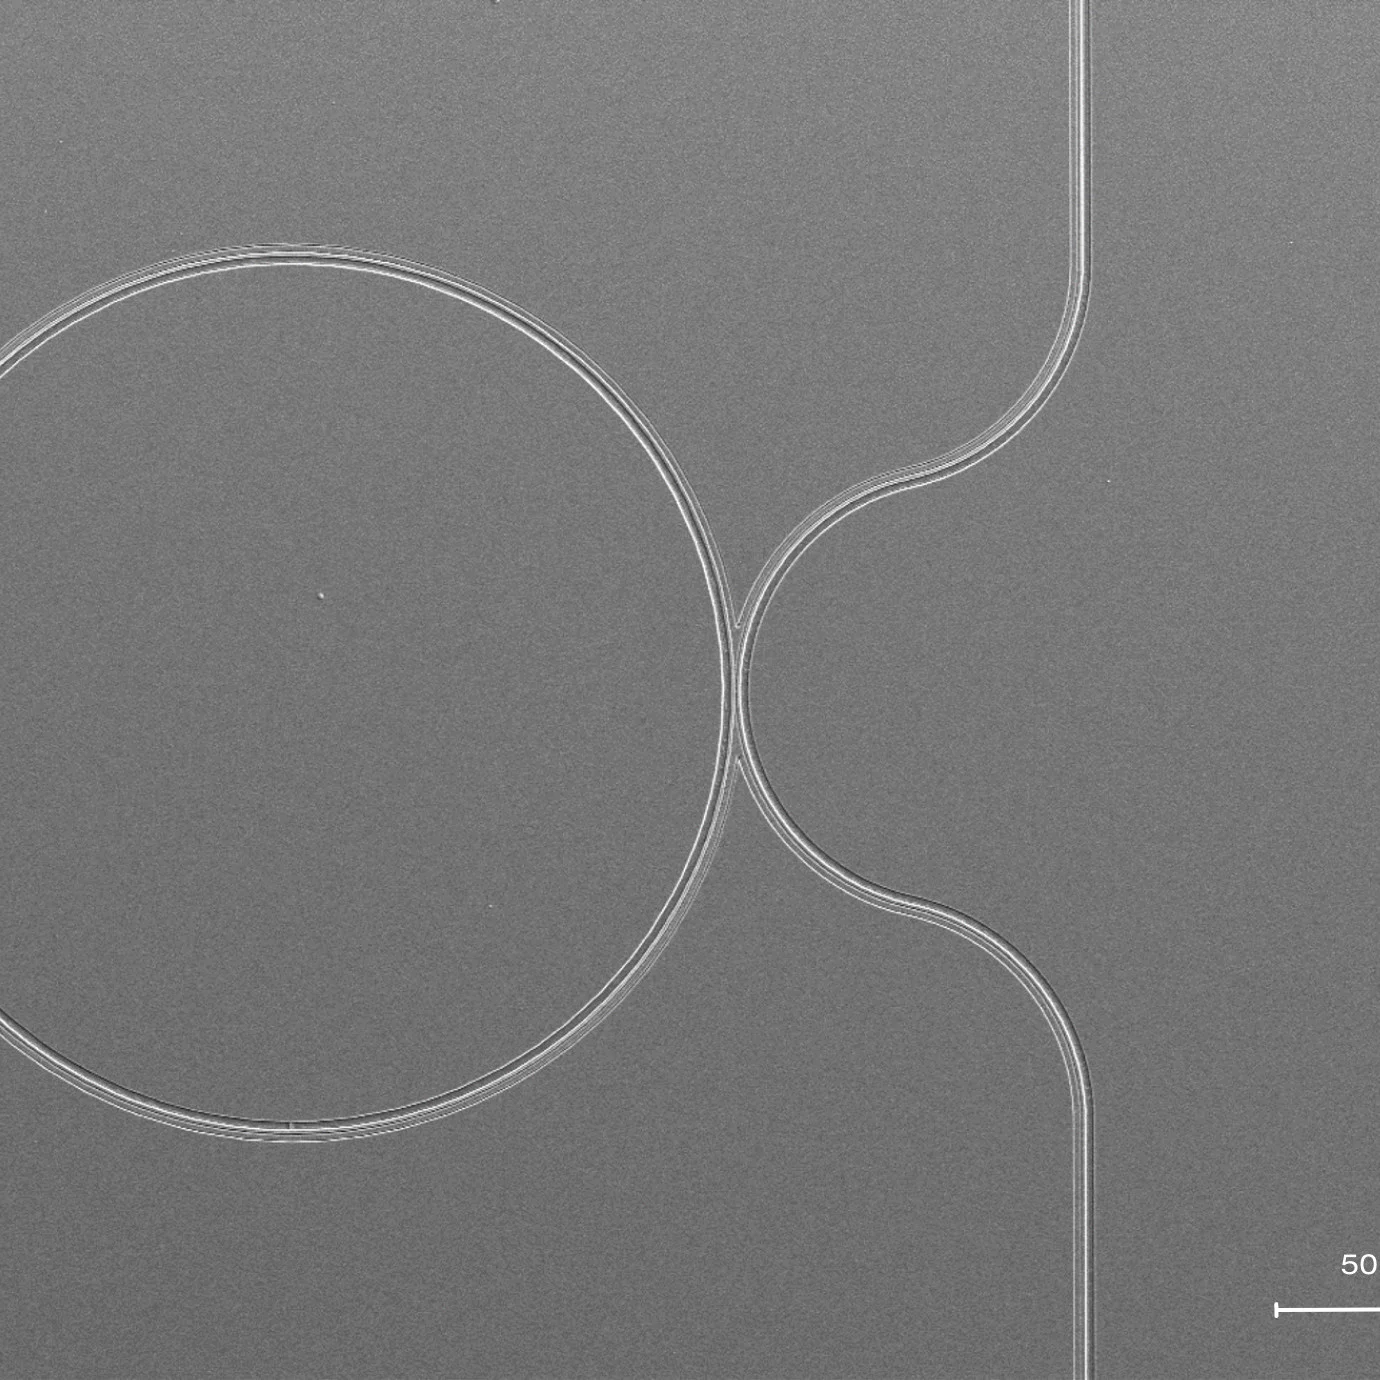 SEM image of an optical resonator manufactured with laser beam lithography